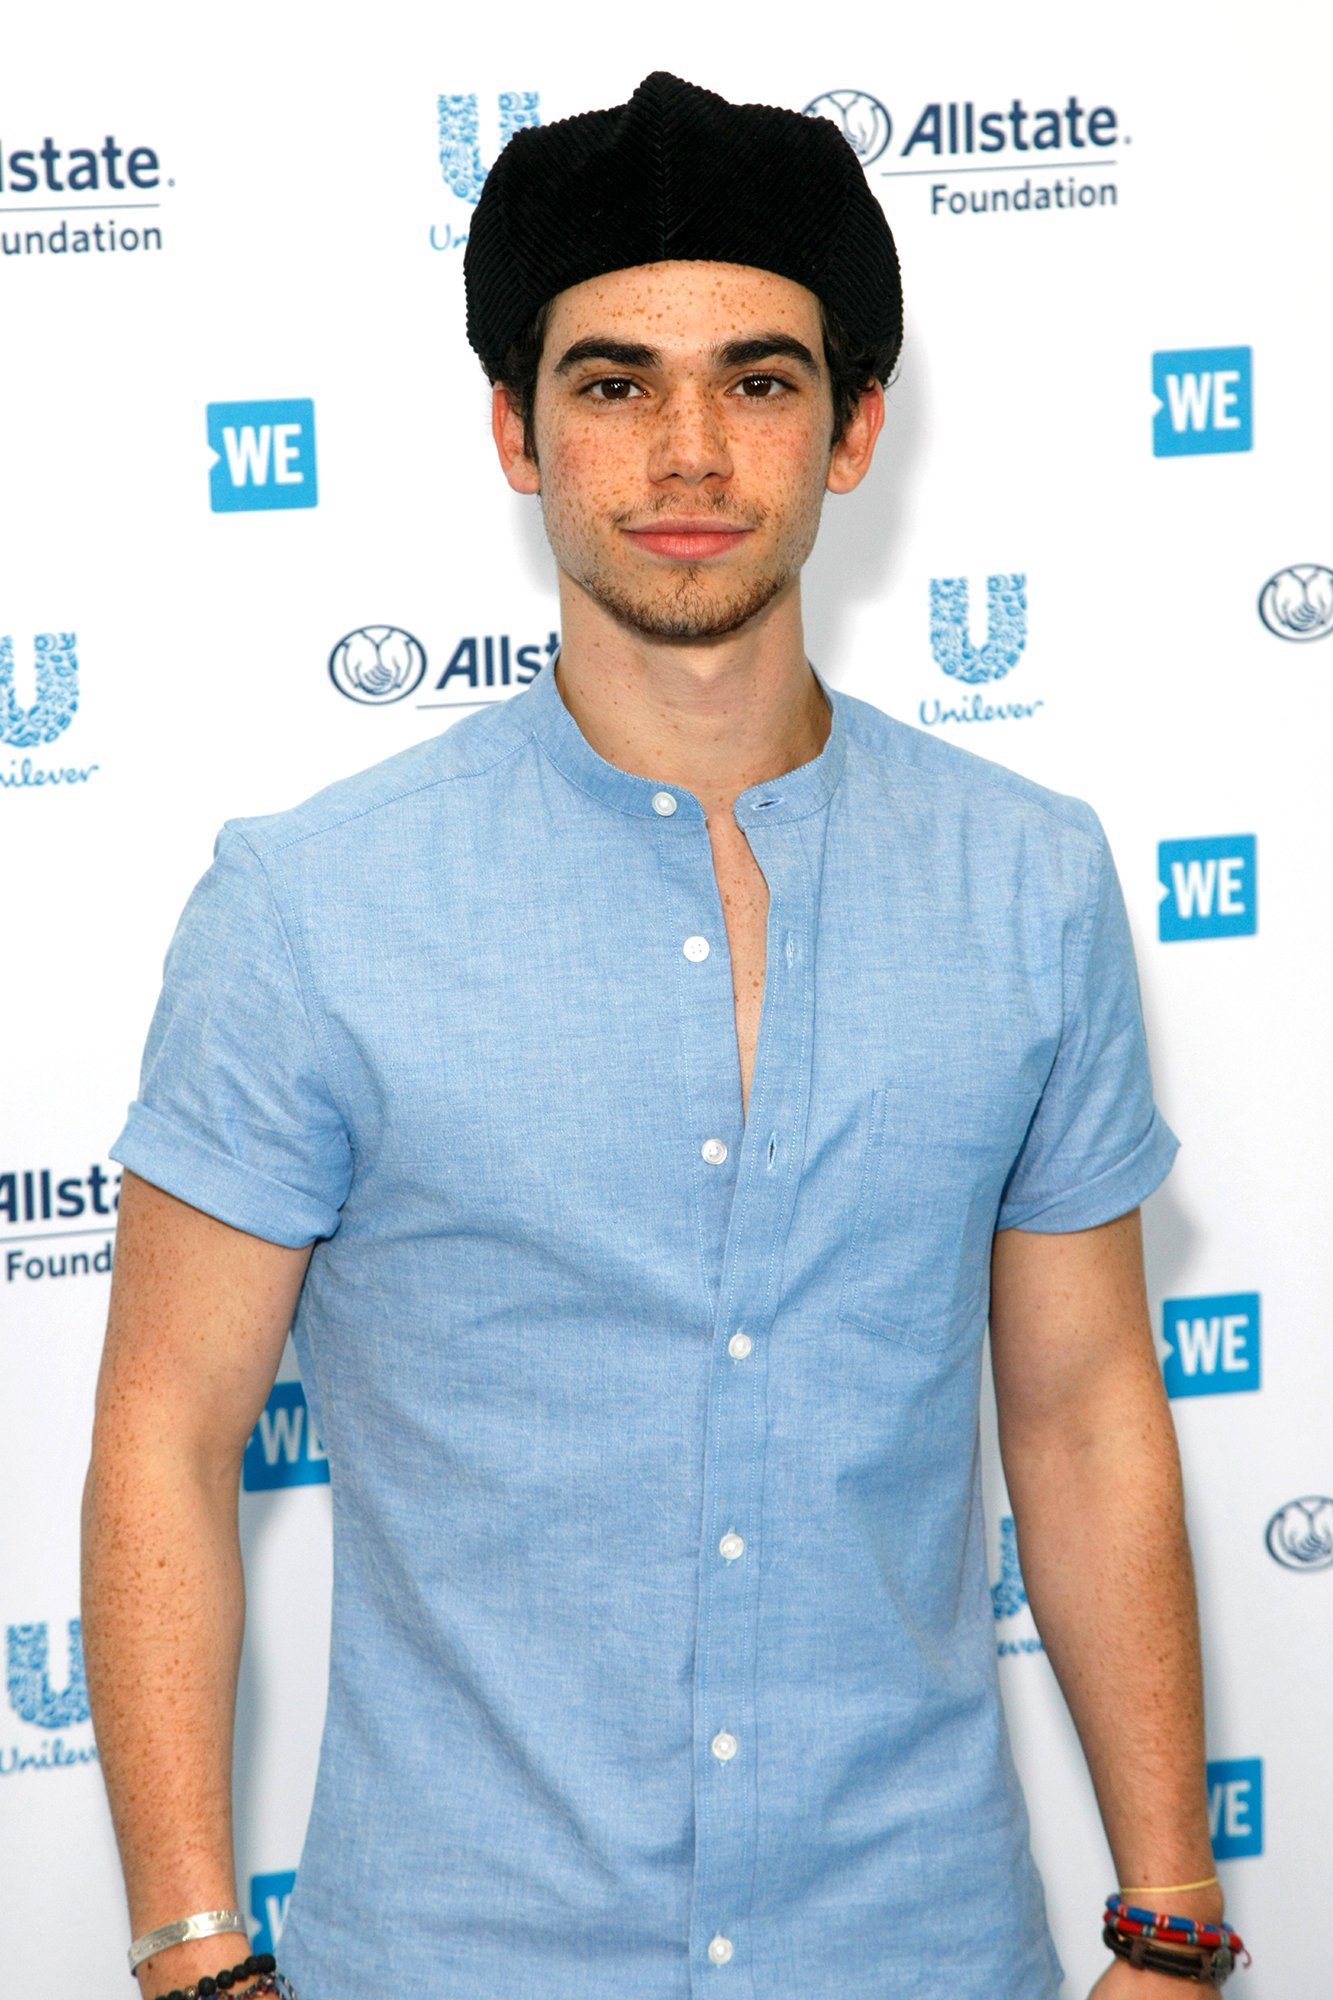 Stars Pay Tribute to Late Cameron Boyce on His Birthday: Dove Cameron, Sofia Carson and More